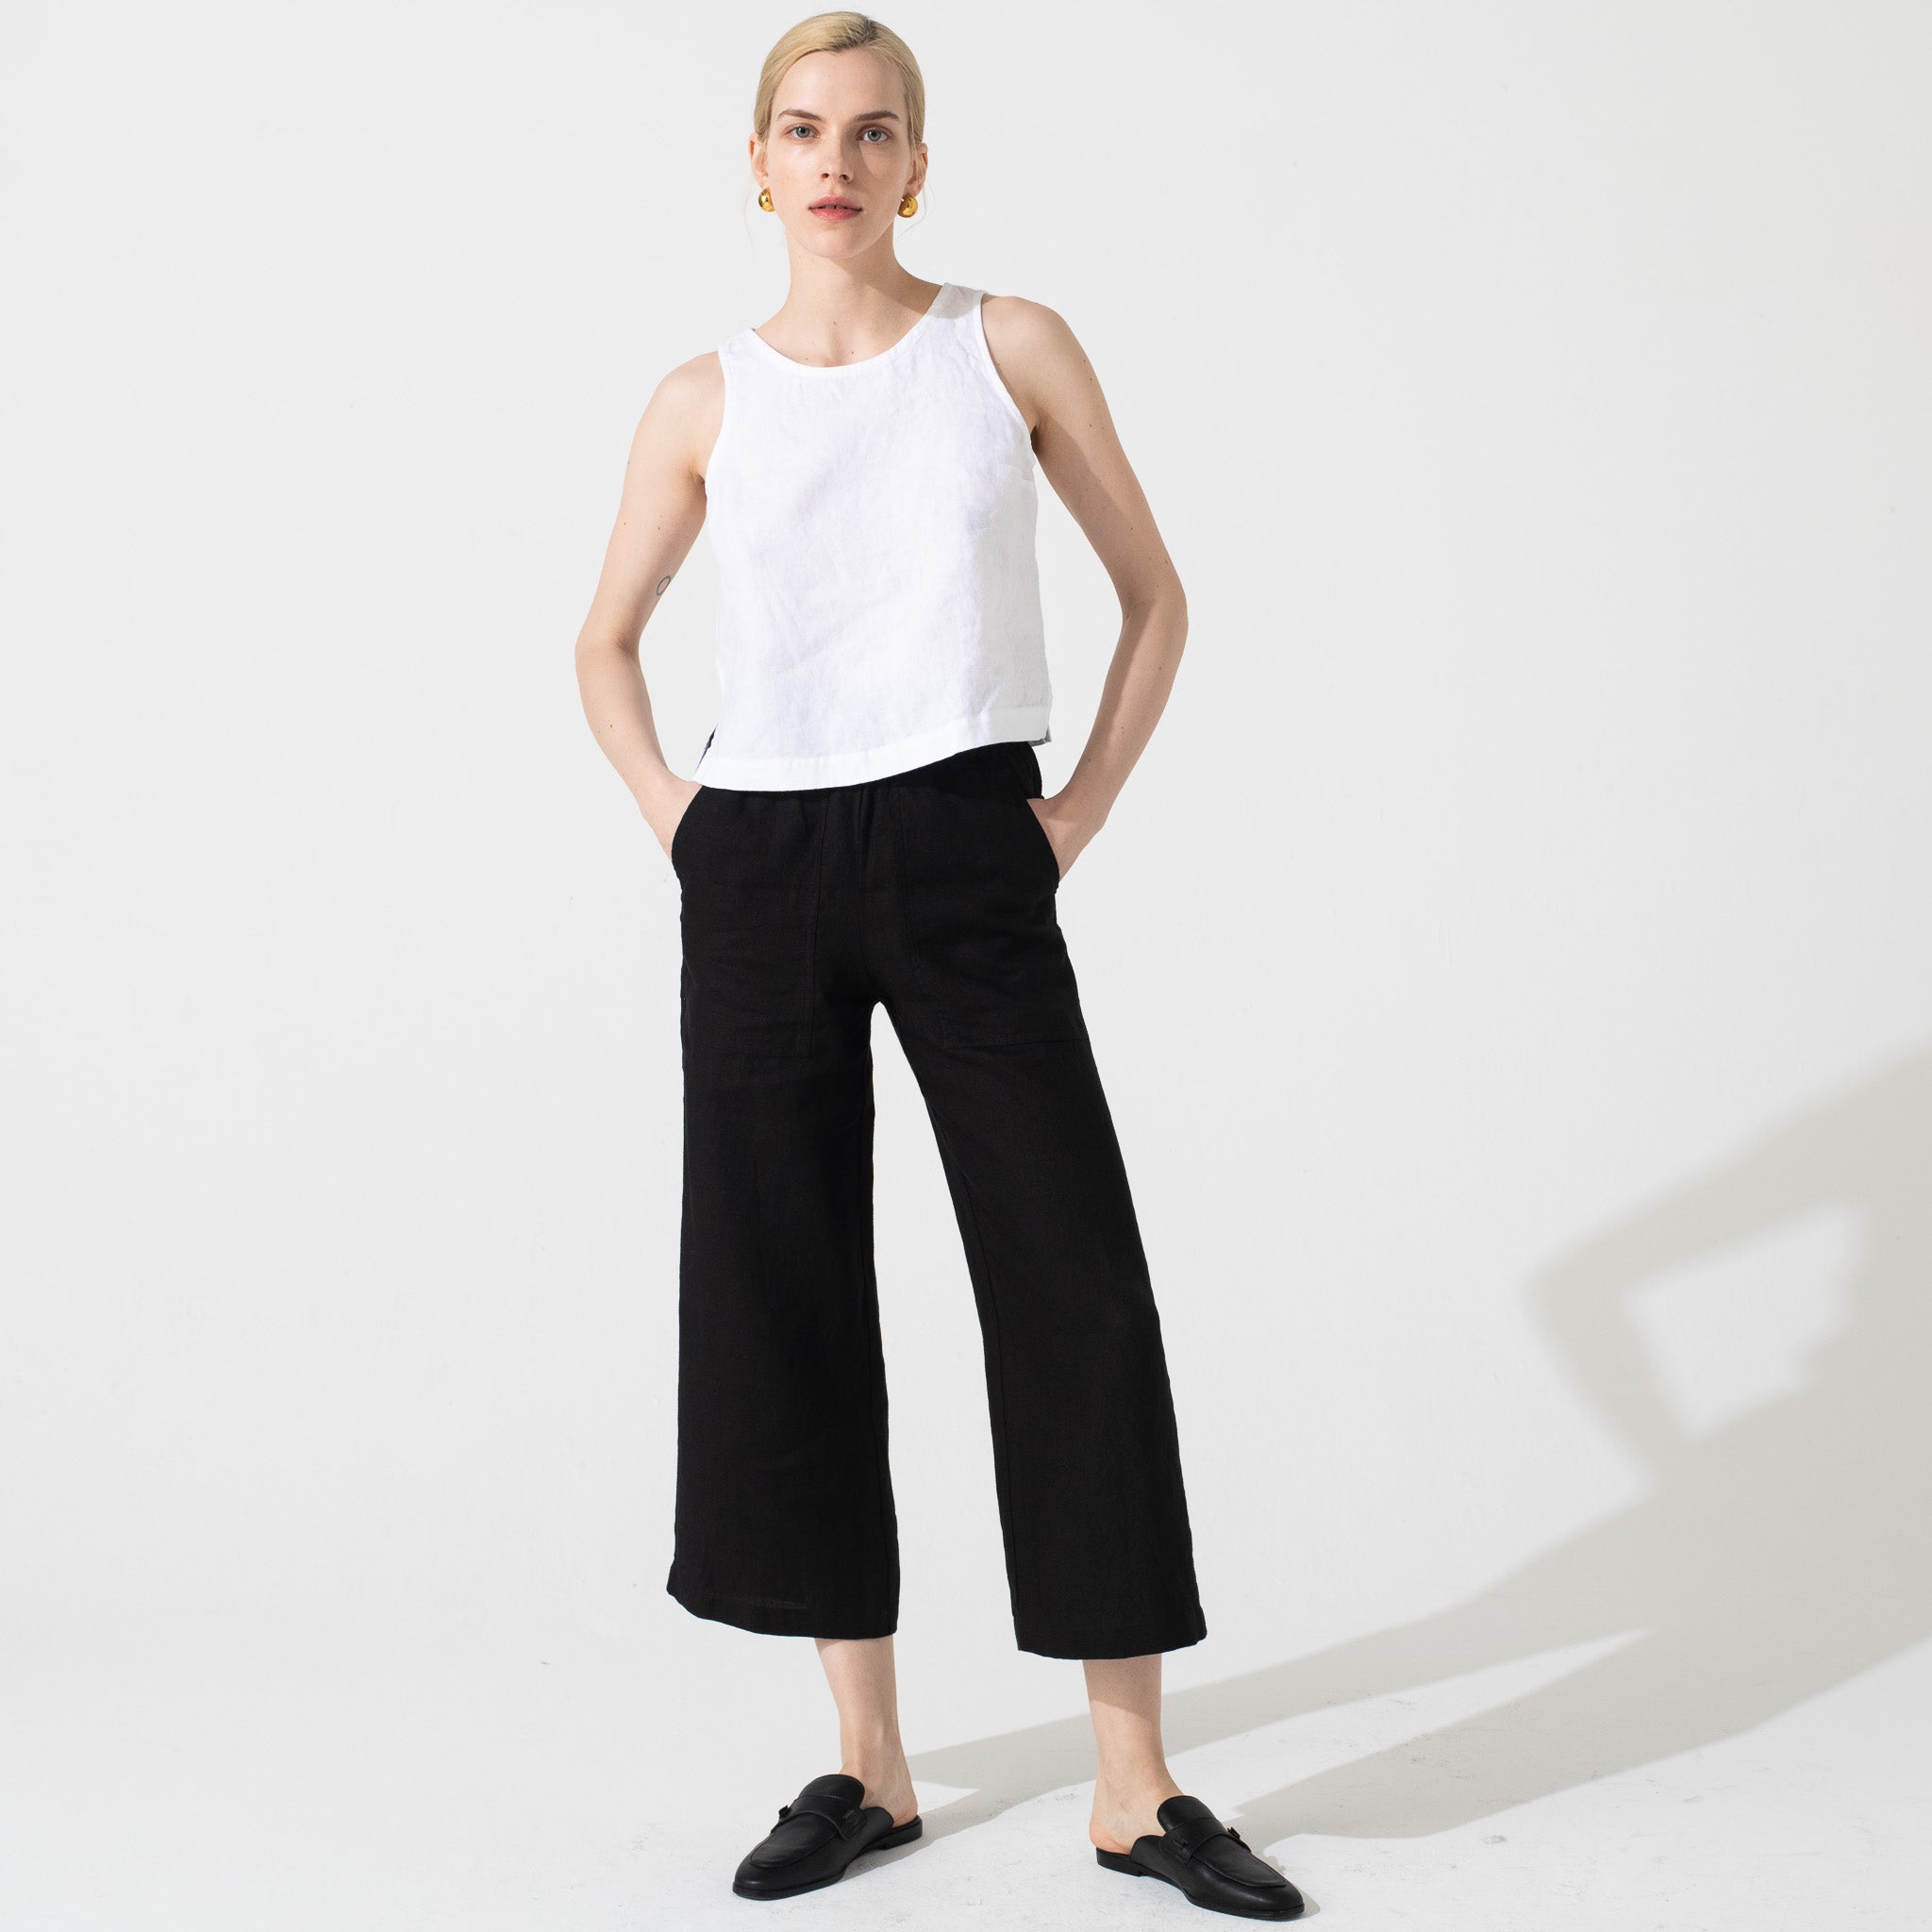 PUGLIA fitted linen pants in Black – 2isenough